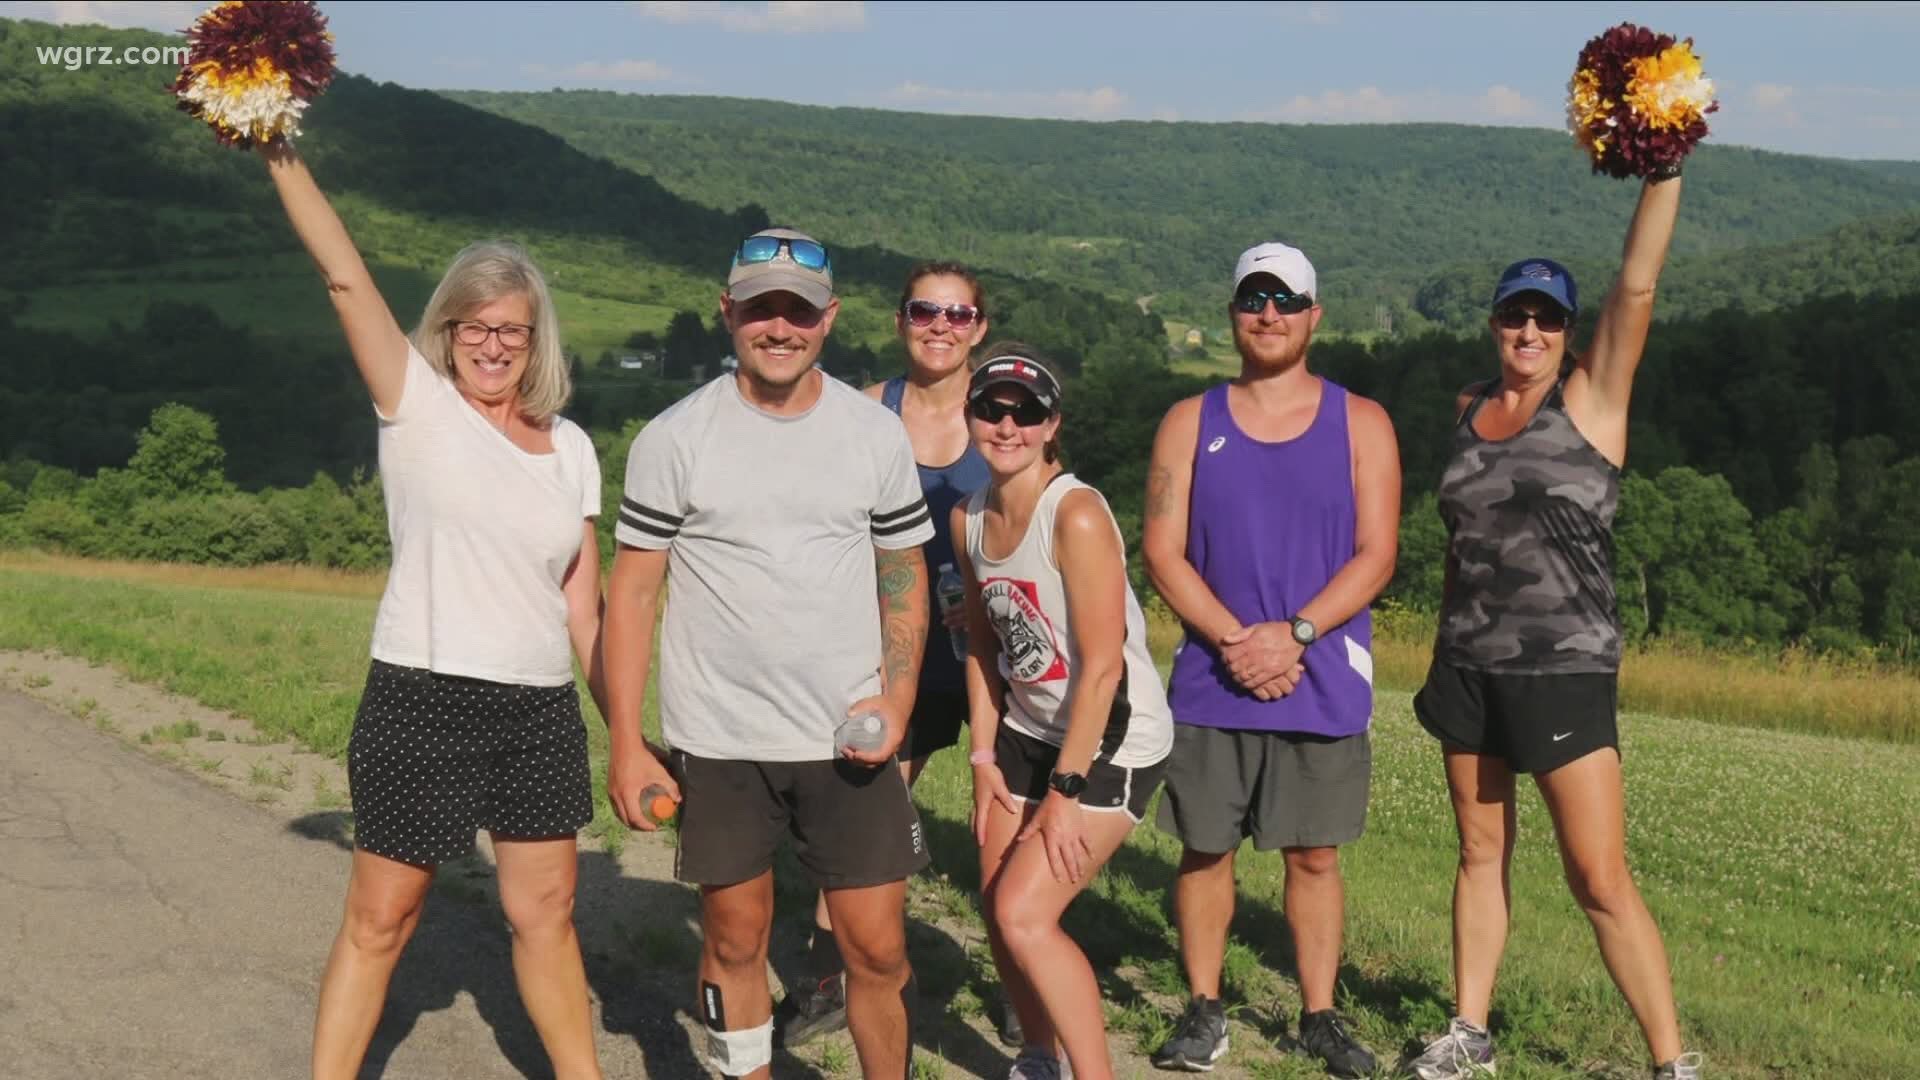 Bradley Poole was a man on a mission and ran through every town in Cattaraugus County during the hottest week of the summer.